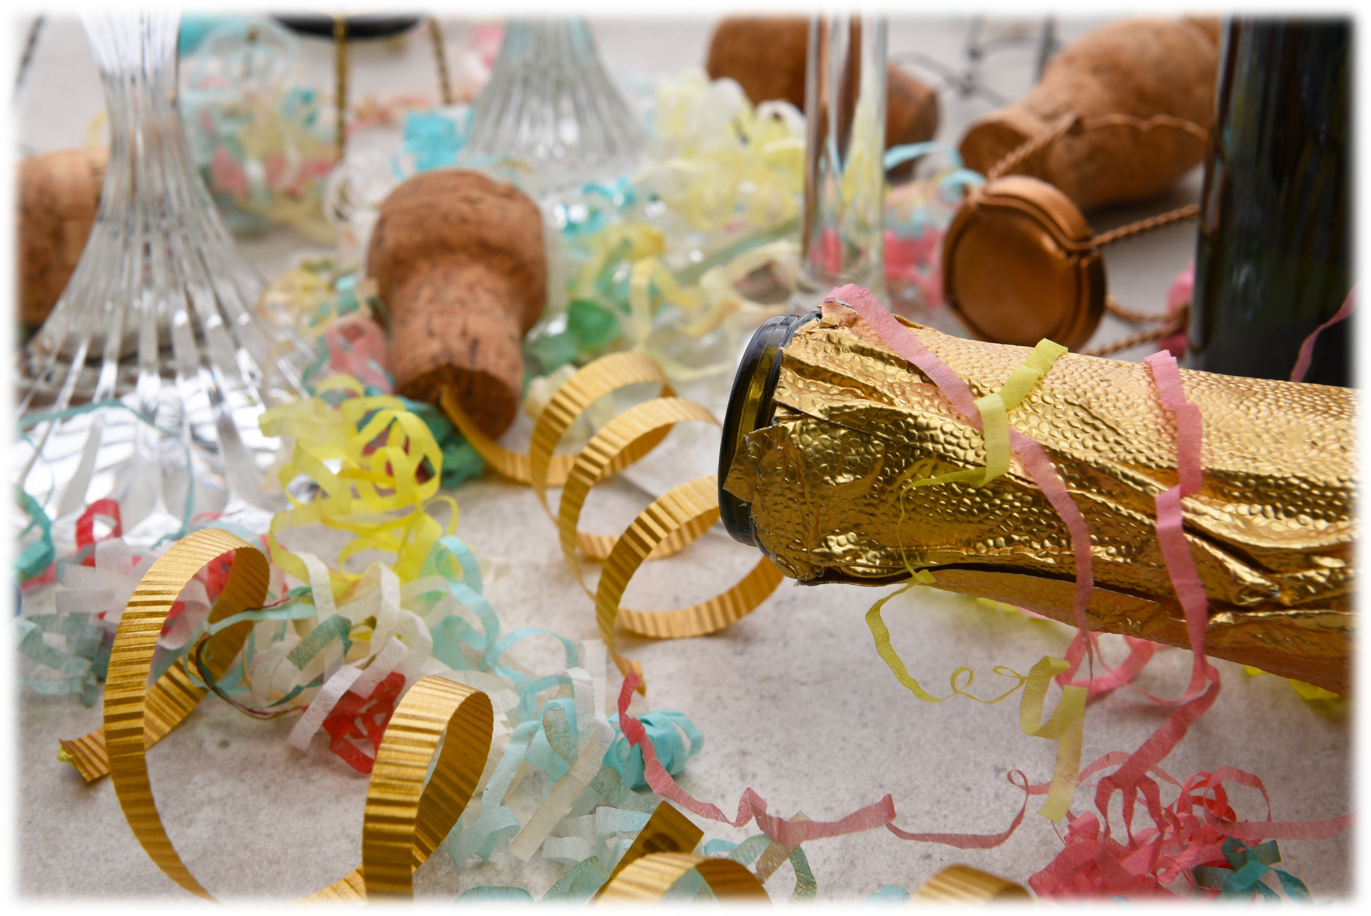 Link to New Year's Eve Safety - Bottle with corks and confetti on table